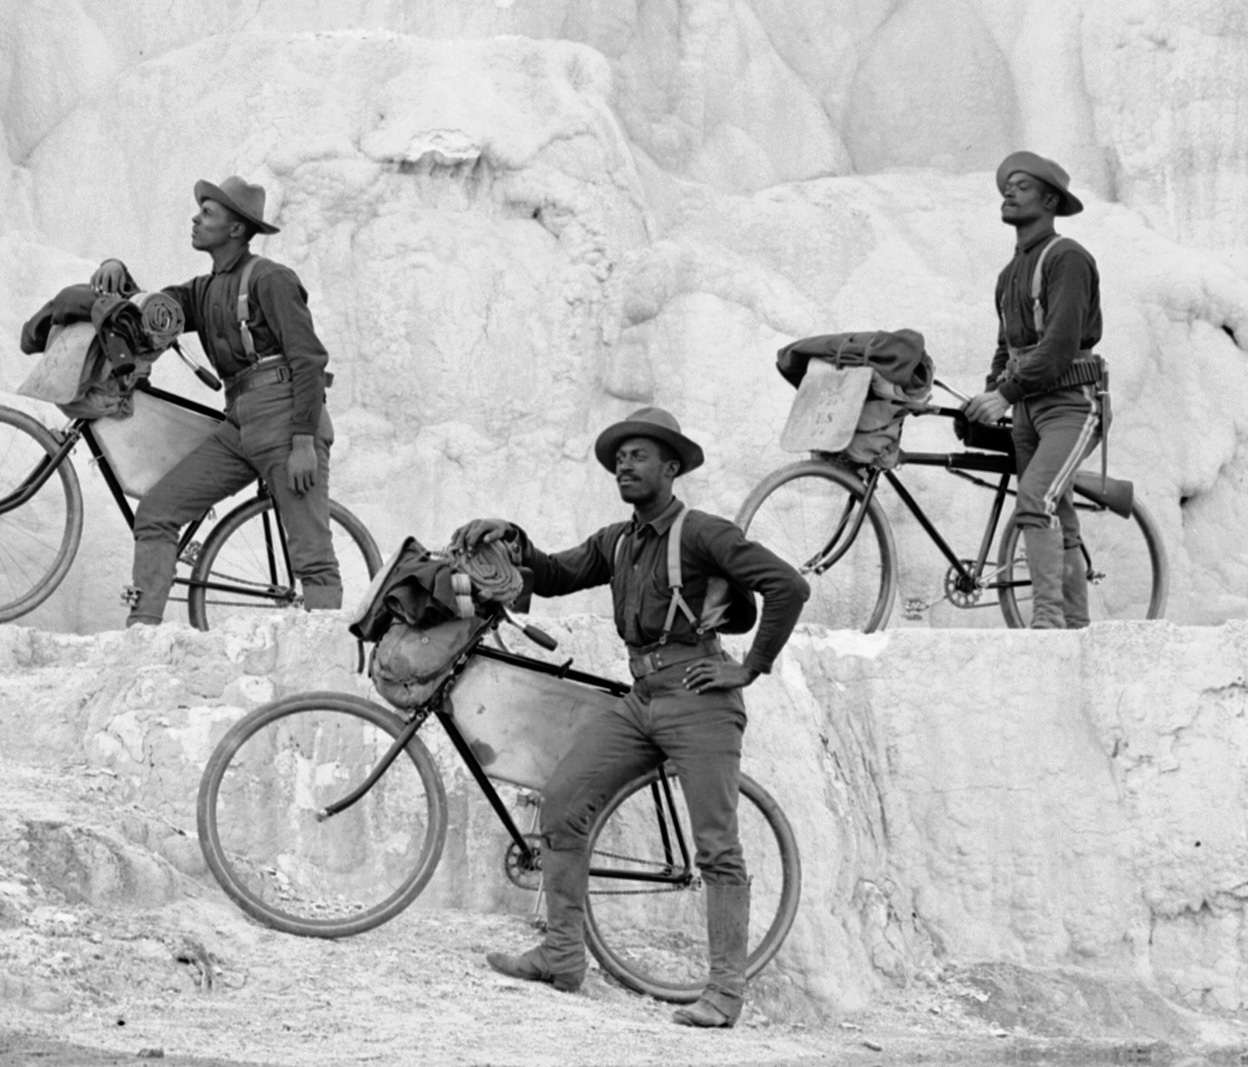 25th Infantry Regiment Bicycle Corps on Minerva Terrace, Mammoth Hot Springs,Yellowstone National Park,